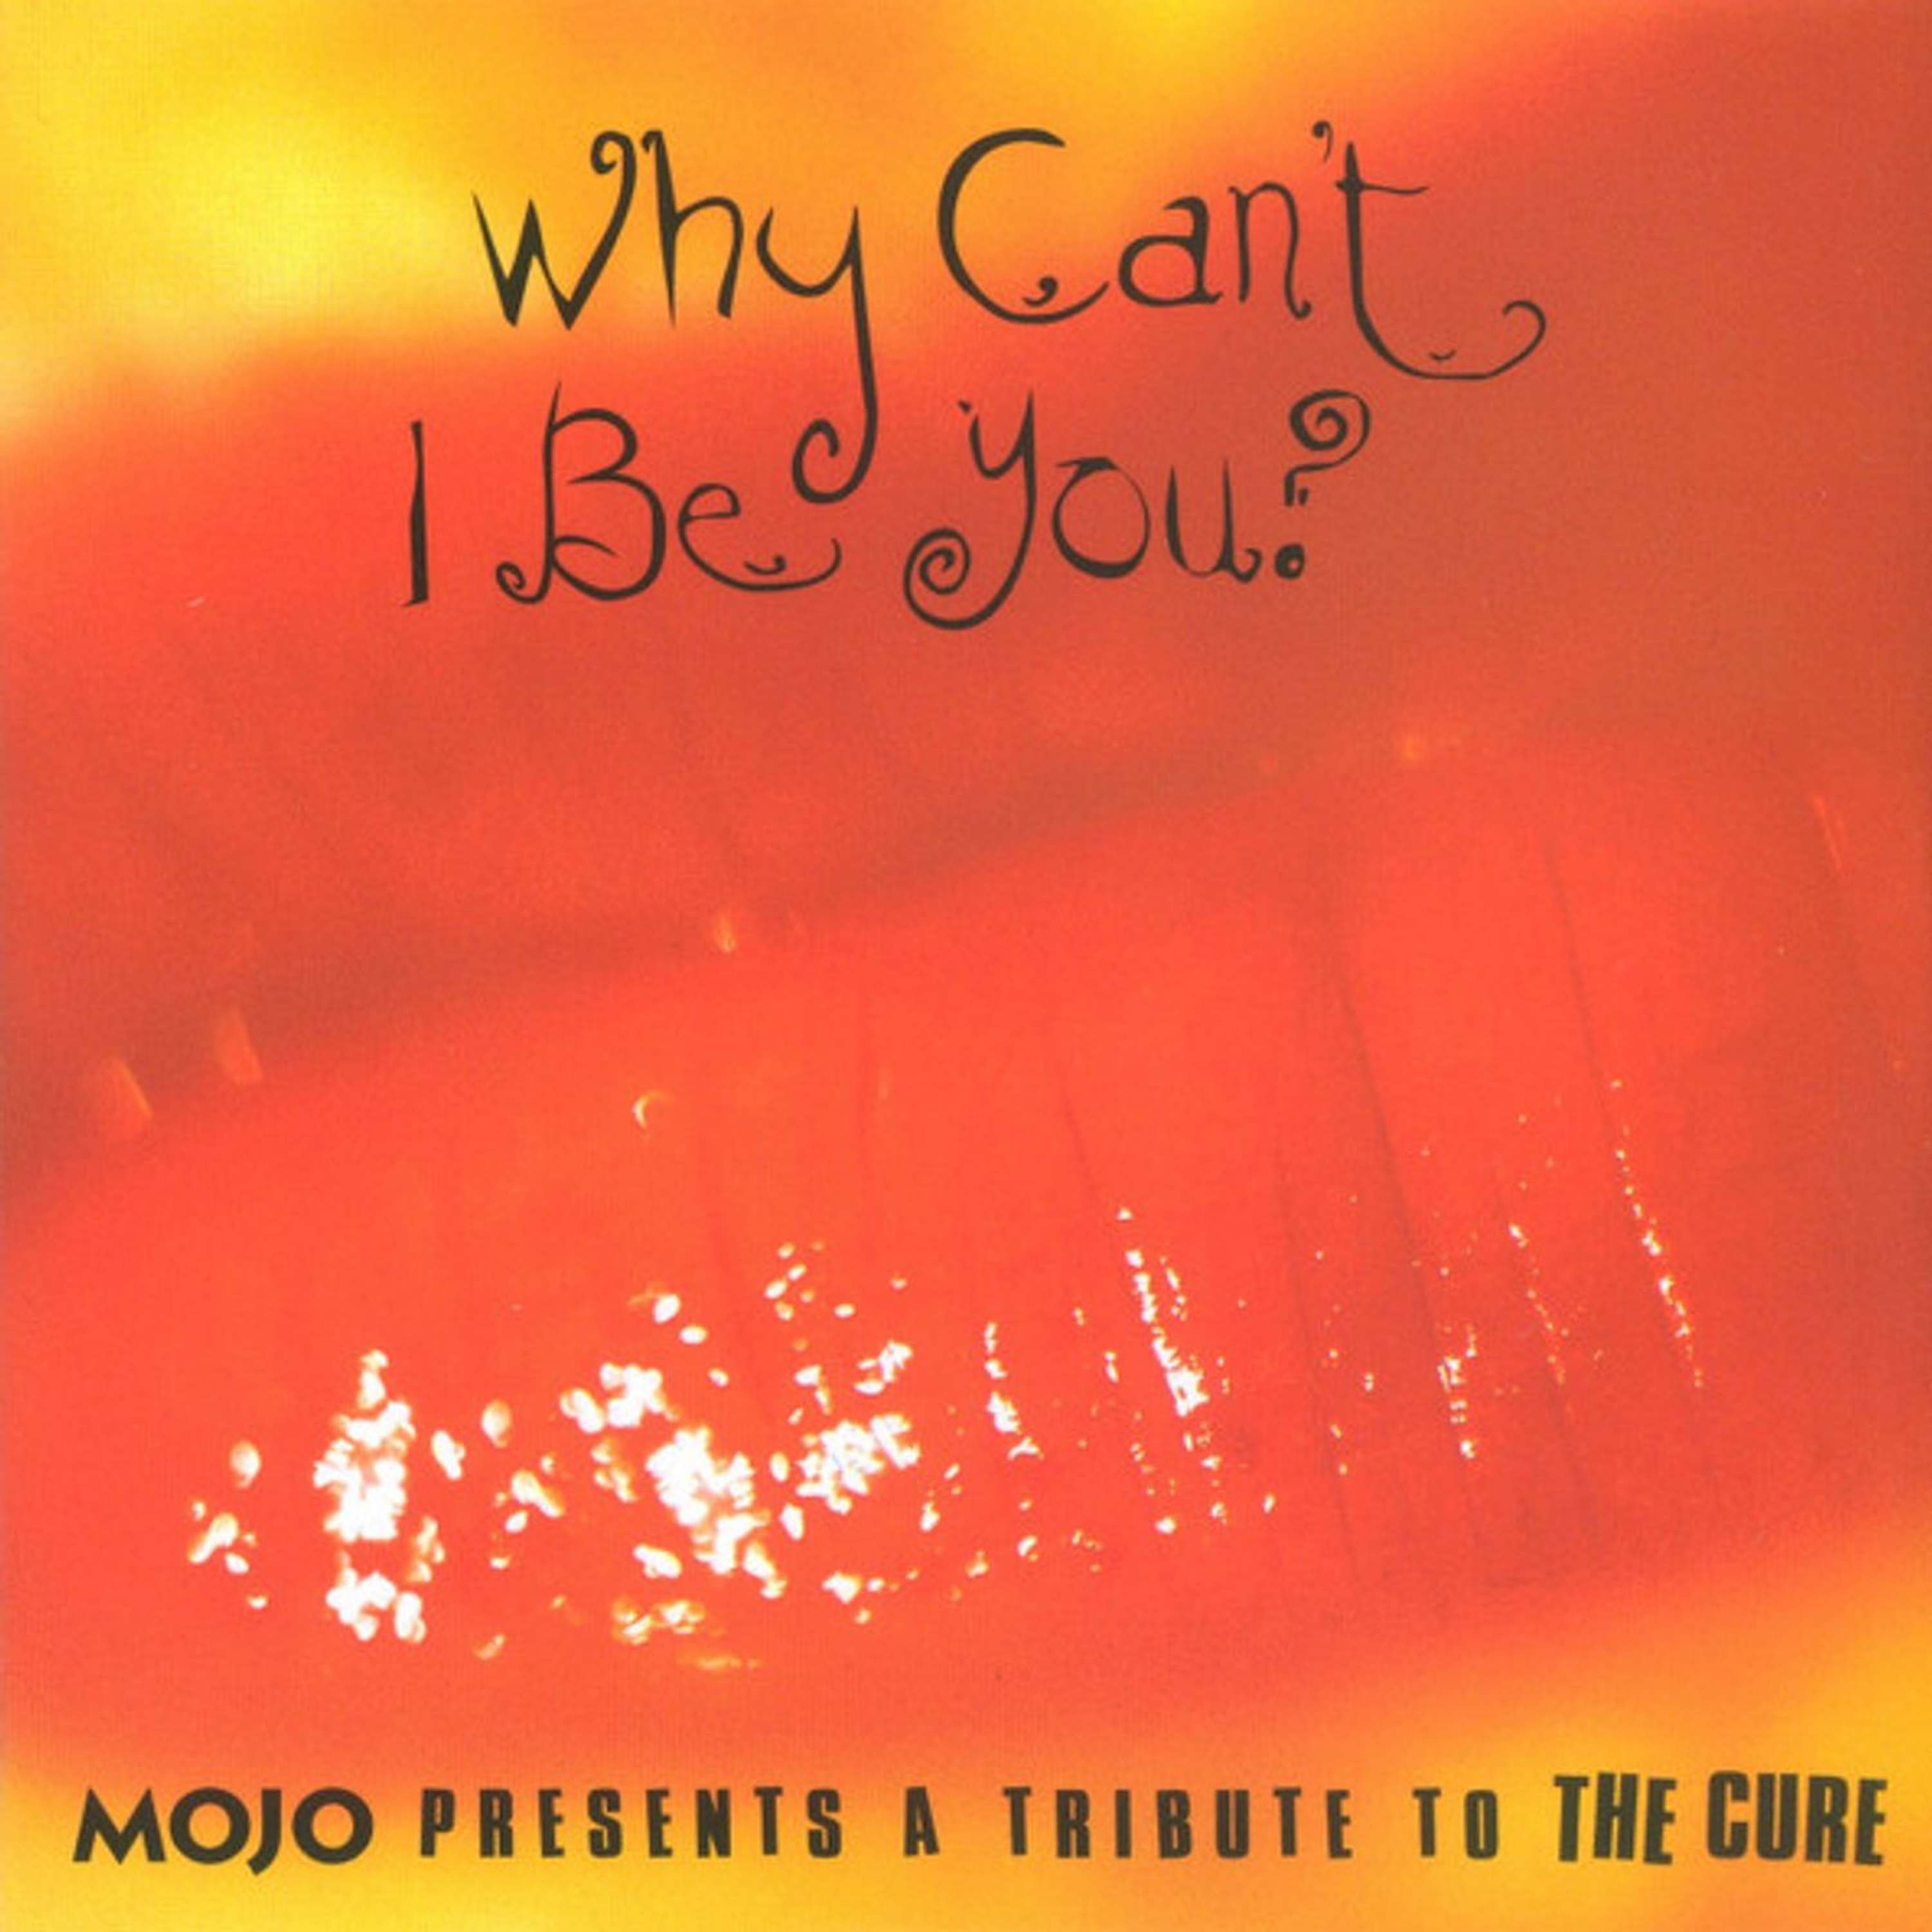 Free With This Months Issue 60 - Simon Price picks Why Cant I Be You (Mojo Presents A Tribute To The Cure)